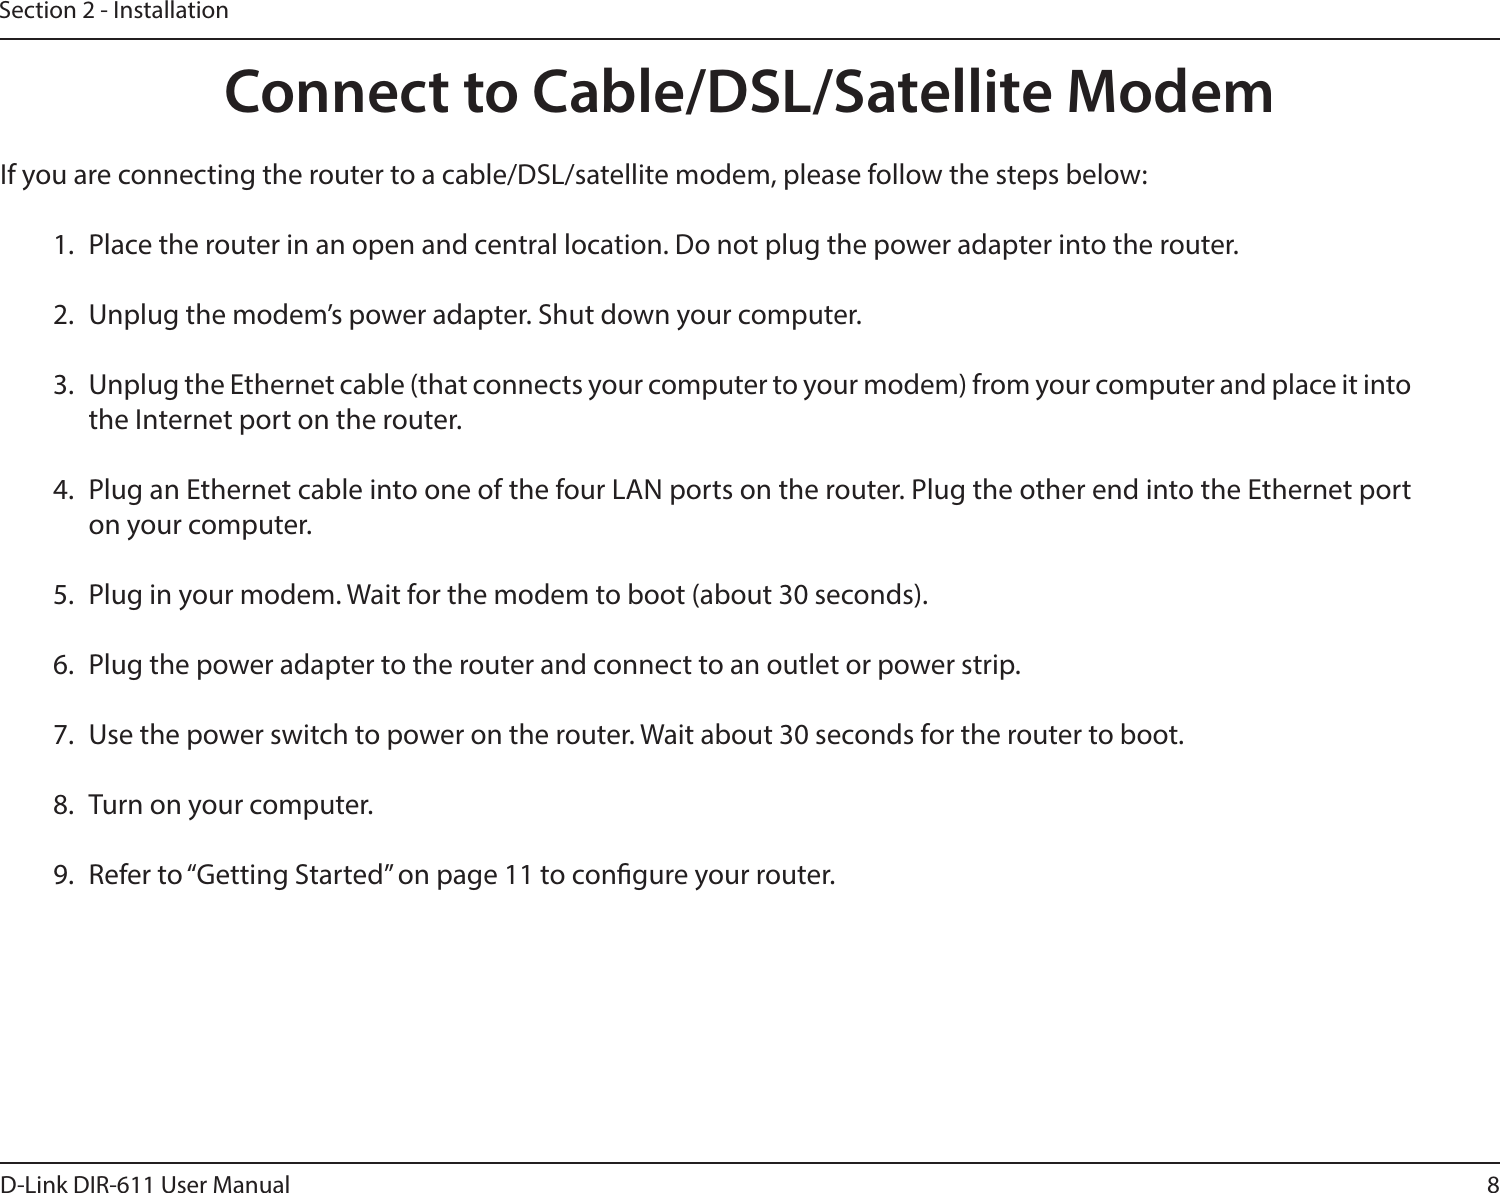 8D-Link DIR-611 User ManualSection 2 - InstallationIf you are connecting the router to a cable/DSL/satellite modem, please follow the steps below:1.  Place the router in an open and central location. Do not plug the power adapter into the router.2.  Unplug the modem’s power adapter. Shut down your computer.3.  Unplug the Ethernet cable (that connects your computer to your modem) from your computer and place it into the Internet port on the router.4.  Plug an Ethernet cable into one of the four LAN ports on the router. Plug the other end into the Ethernet port on your computer.5.  Plug in your modem. Wait for the modem to boot (about 30 seconds).6.  Plug the power adapter to the router and connect to an outlet or power strip. 7.  Use the power switch to power on the router. Wait about 30 seconds for the router to boot.8.  Turn on your computer.9.  Refer to “Getting Started” on page 11 to congure your router.Connect to Cable/DSL/Satellite Modem